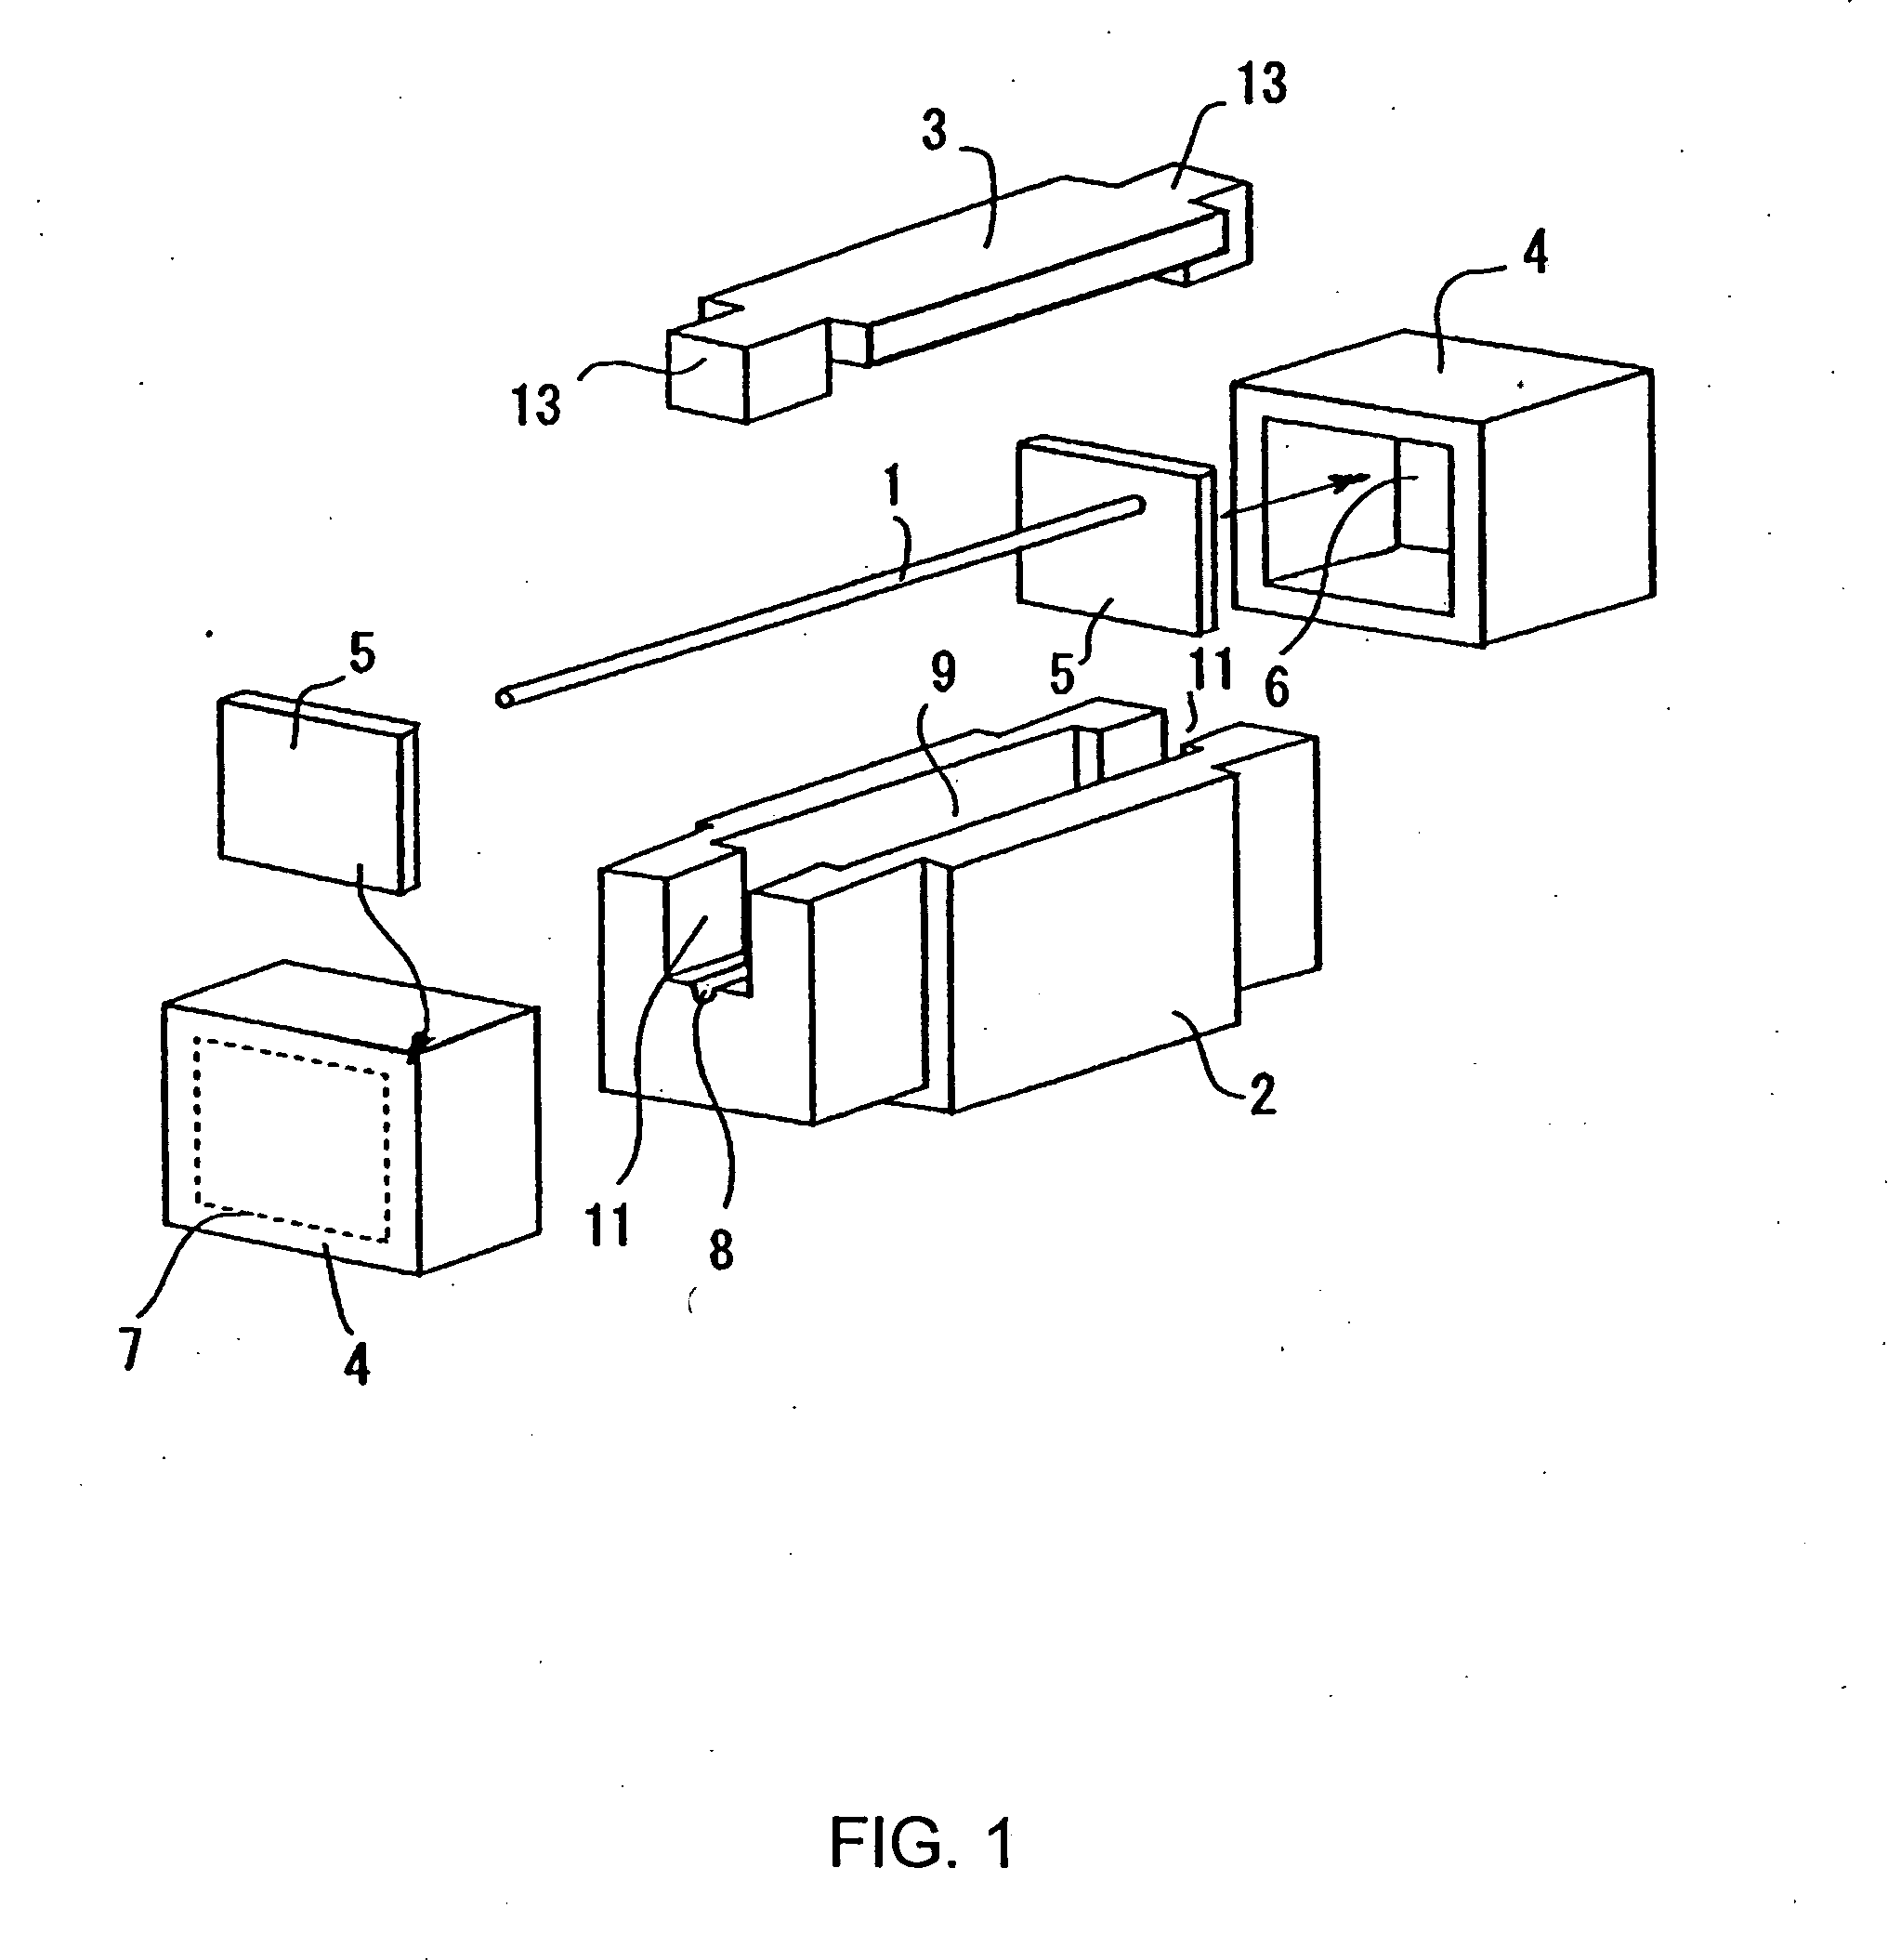 Current fuse and method of making the current fuse